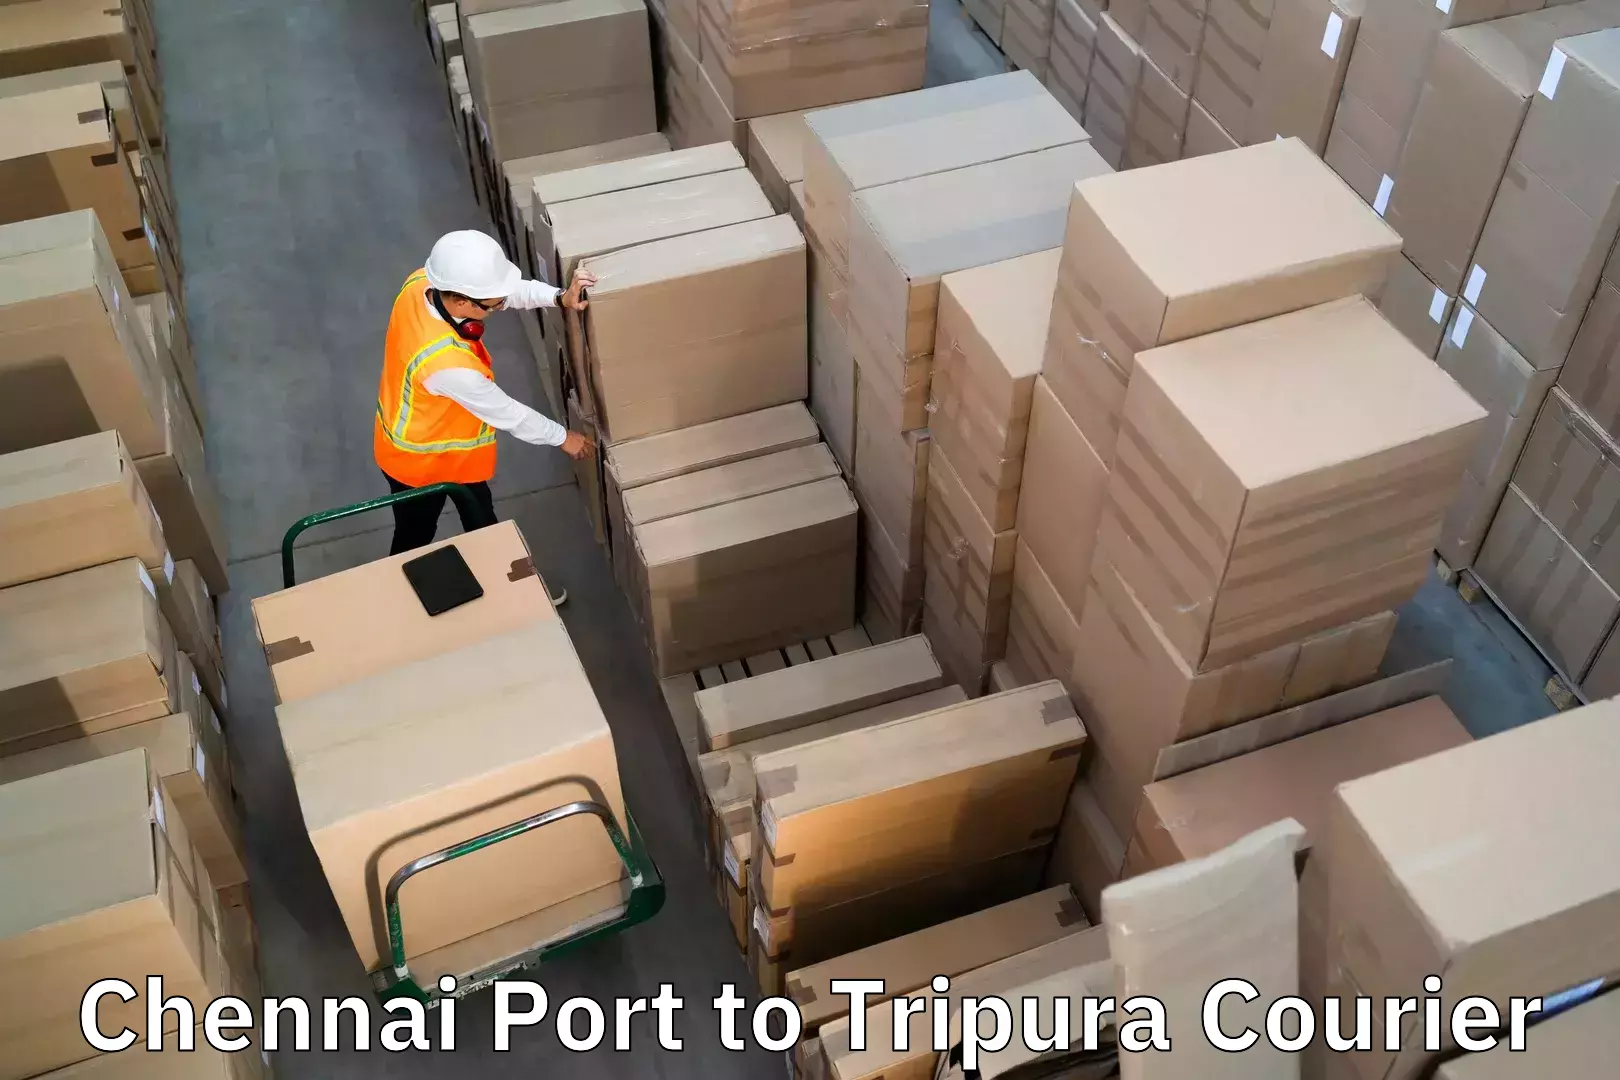 Instant baggage transport quote in Chennai Port to South Tripura